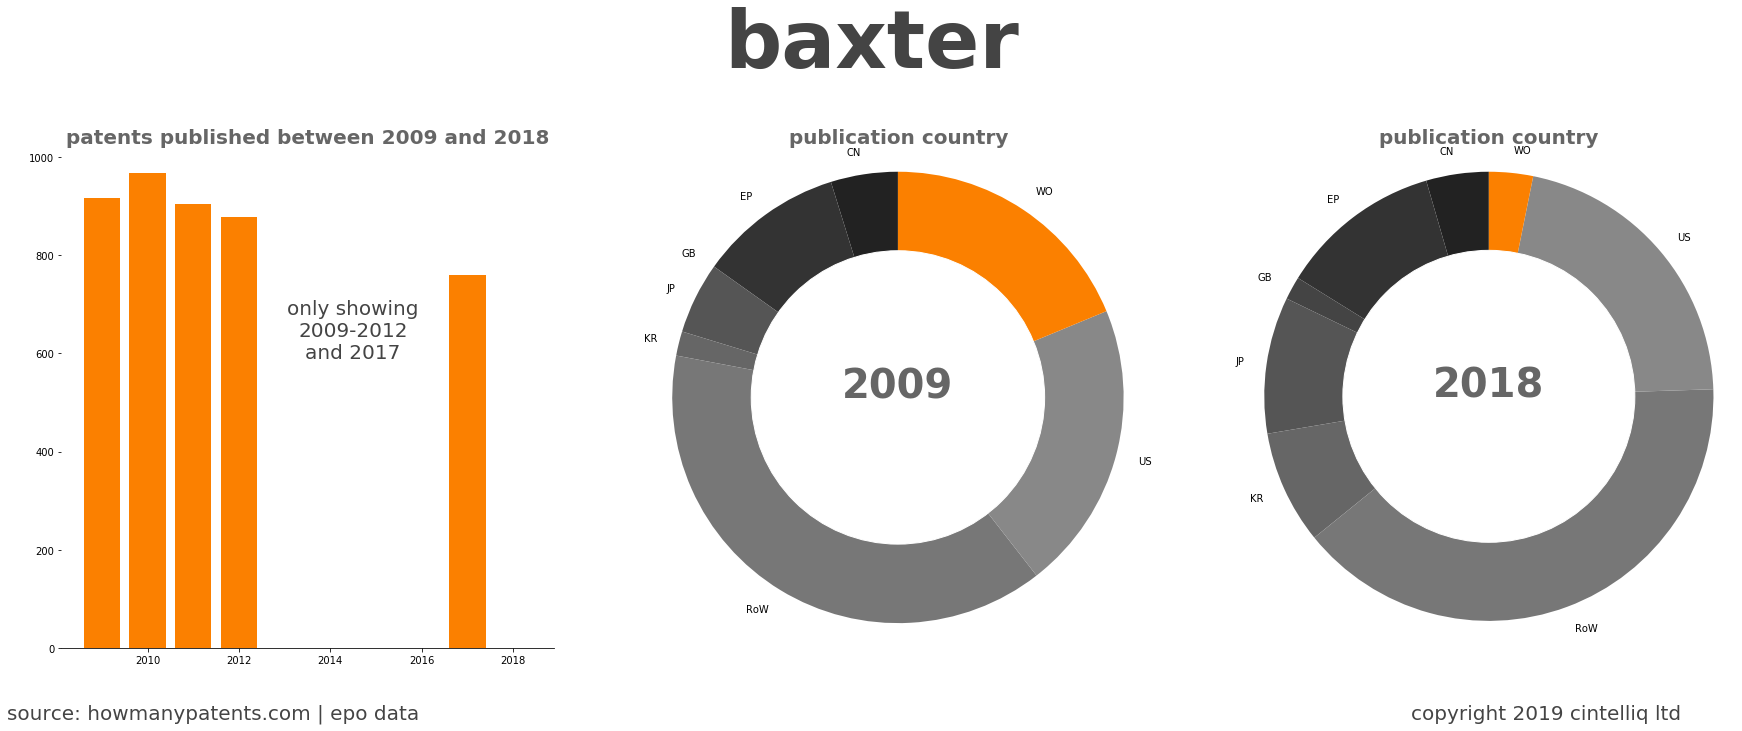 summary of patents for Baxter